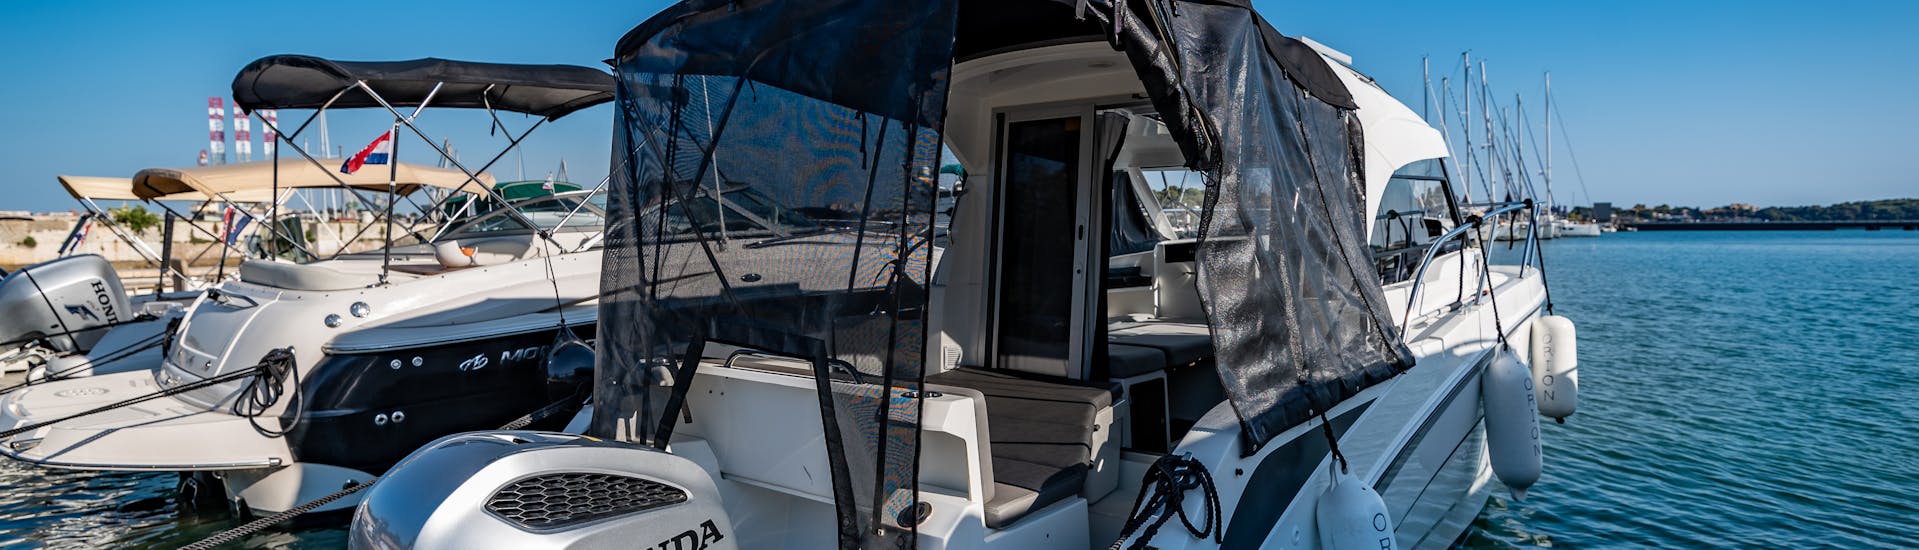 The Beneteau Antares 8 is ready to navigate during the Boat Rental in Pula (up to 9 people) with BELLEN Boat Rental.